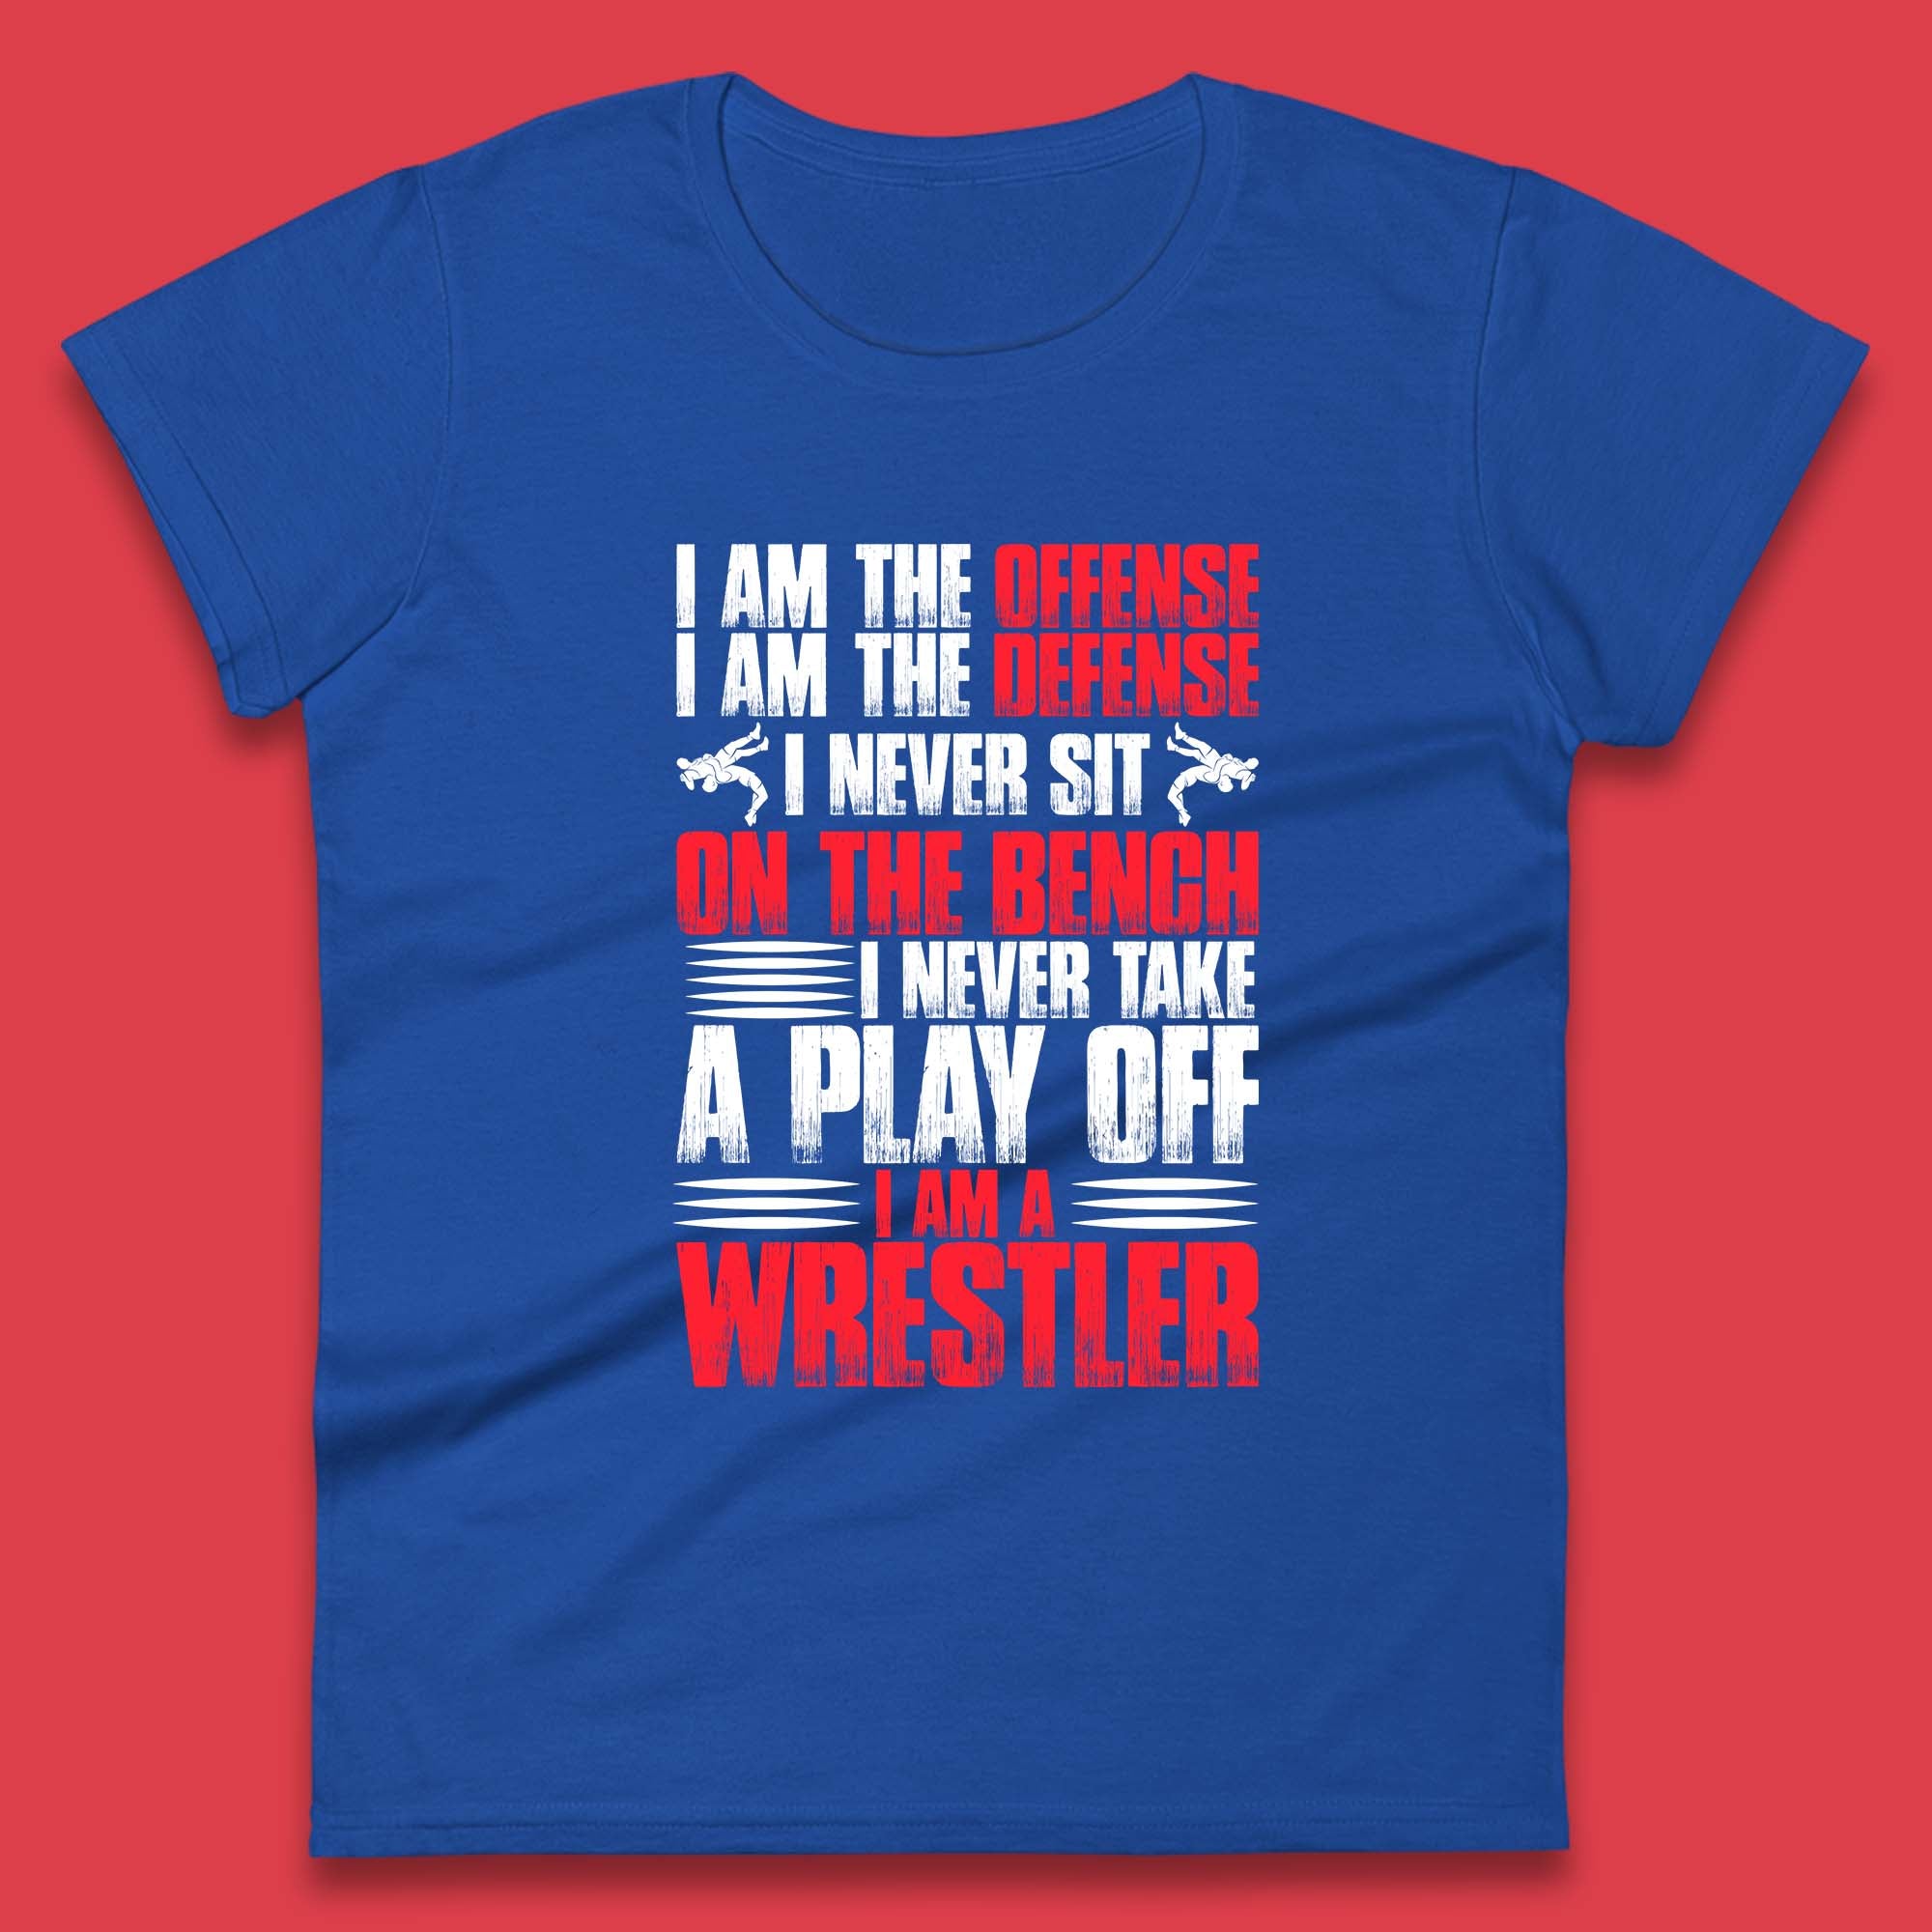 I Am The Offense I Am The Deffense I Never Sit On The Bench I Never Take A Play Off I Am A Wrestler Professional Wrestling Womens Tee Top